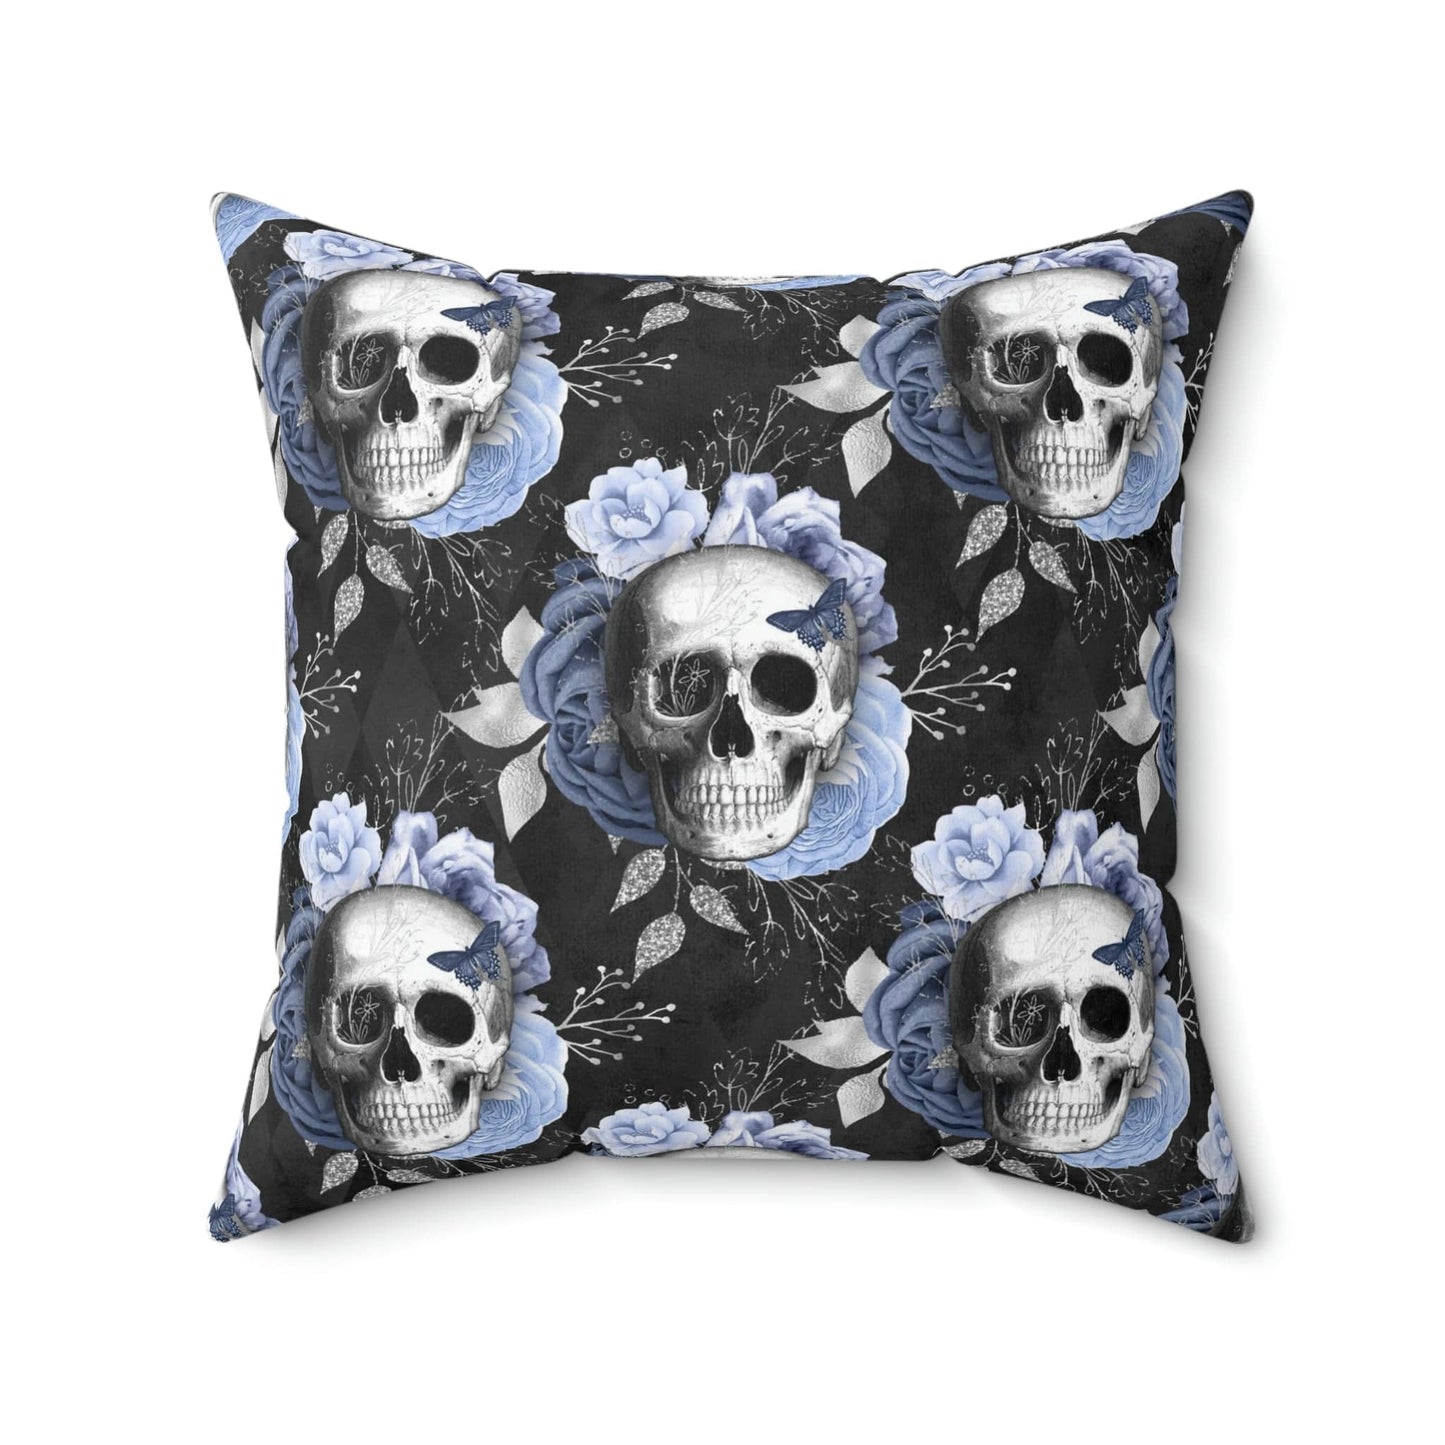 Kate McEnroe New York Floral Skull Square Pillow Cover Throw Pillow Covers 20" × 20" 3549442683